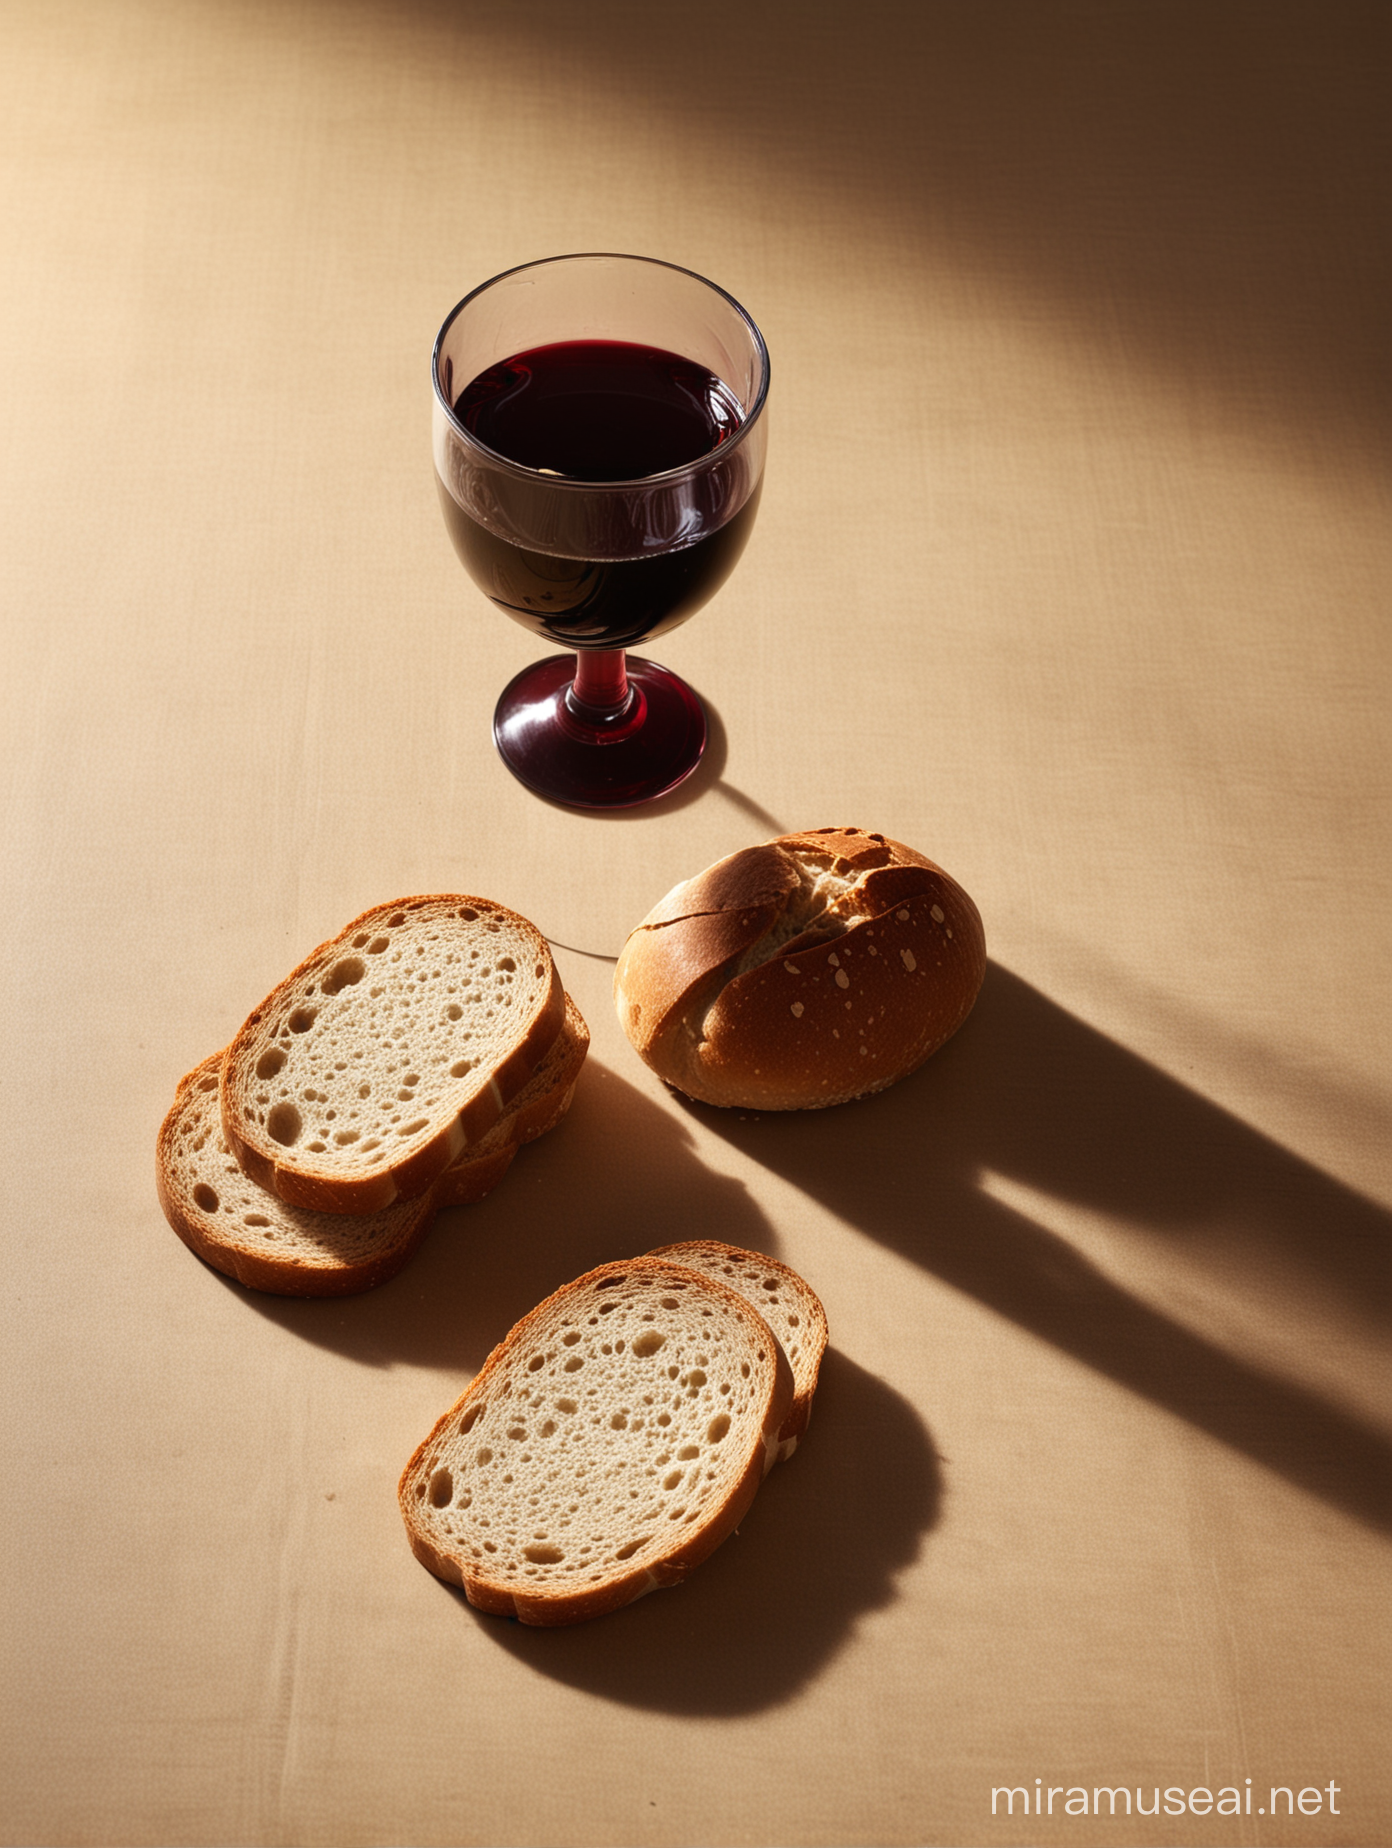 Sacred Communion Illuminated Bread and Wine in Deep Shadows